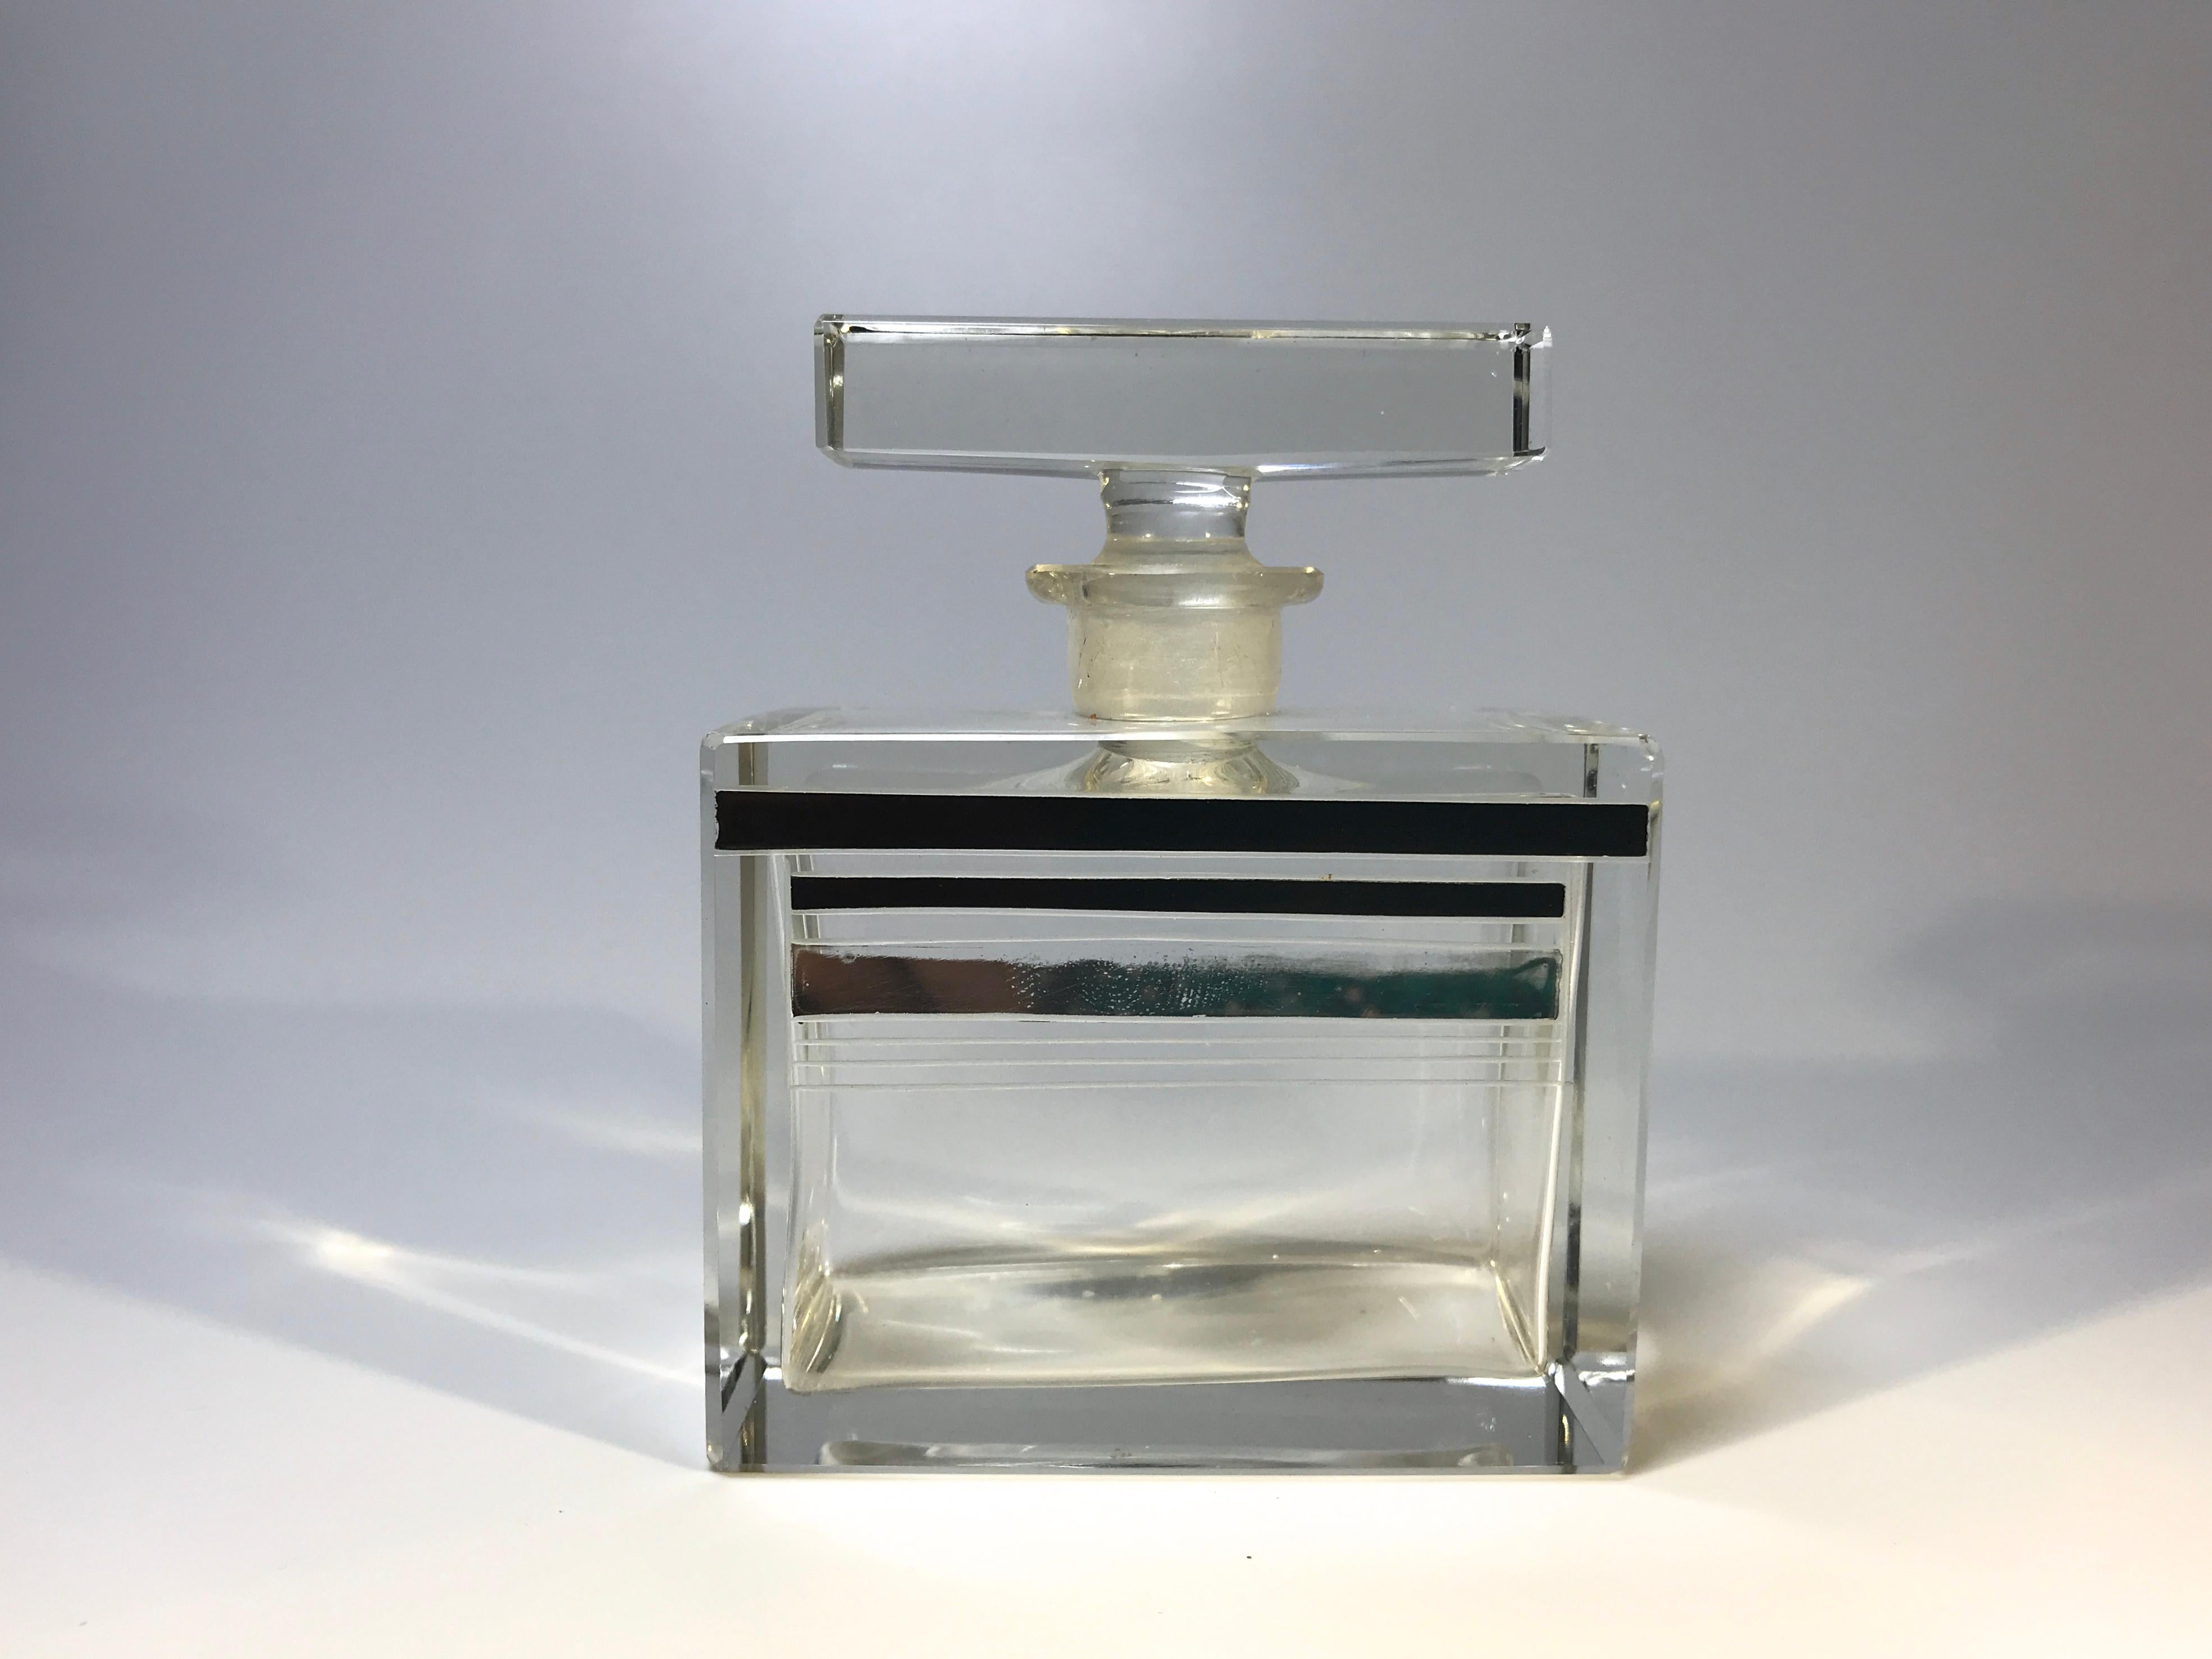 Art Deco hand blown Czech crystal perfume bottle from the 1930s
Very likely by Karl Palda
Classically shaped, with geometric lines of black and silver enamel
Vintage Bohemian, Czech crystal,
circa 1930s
Measures: Height 3.5 inch, width 2.75 inch,